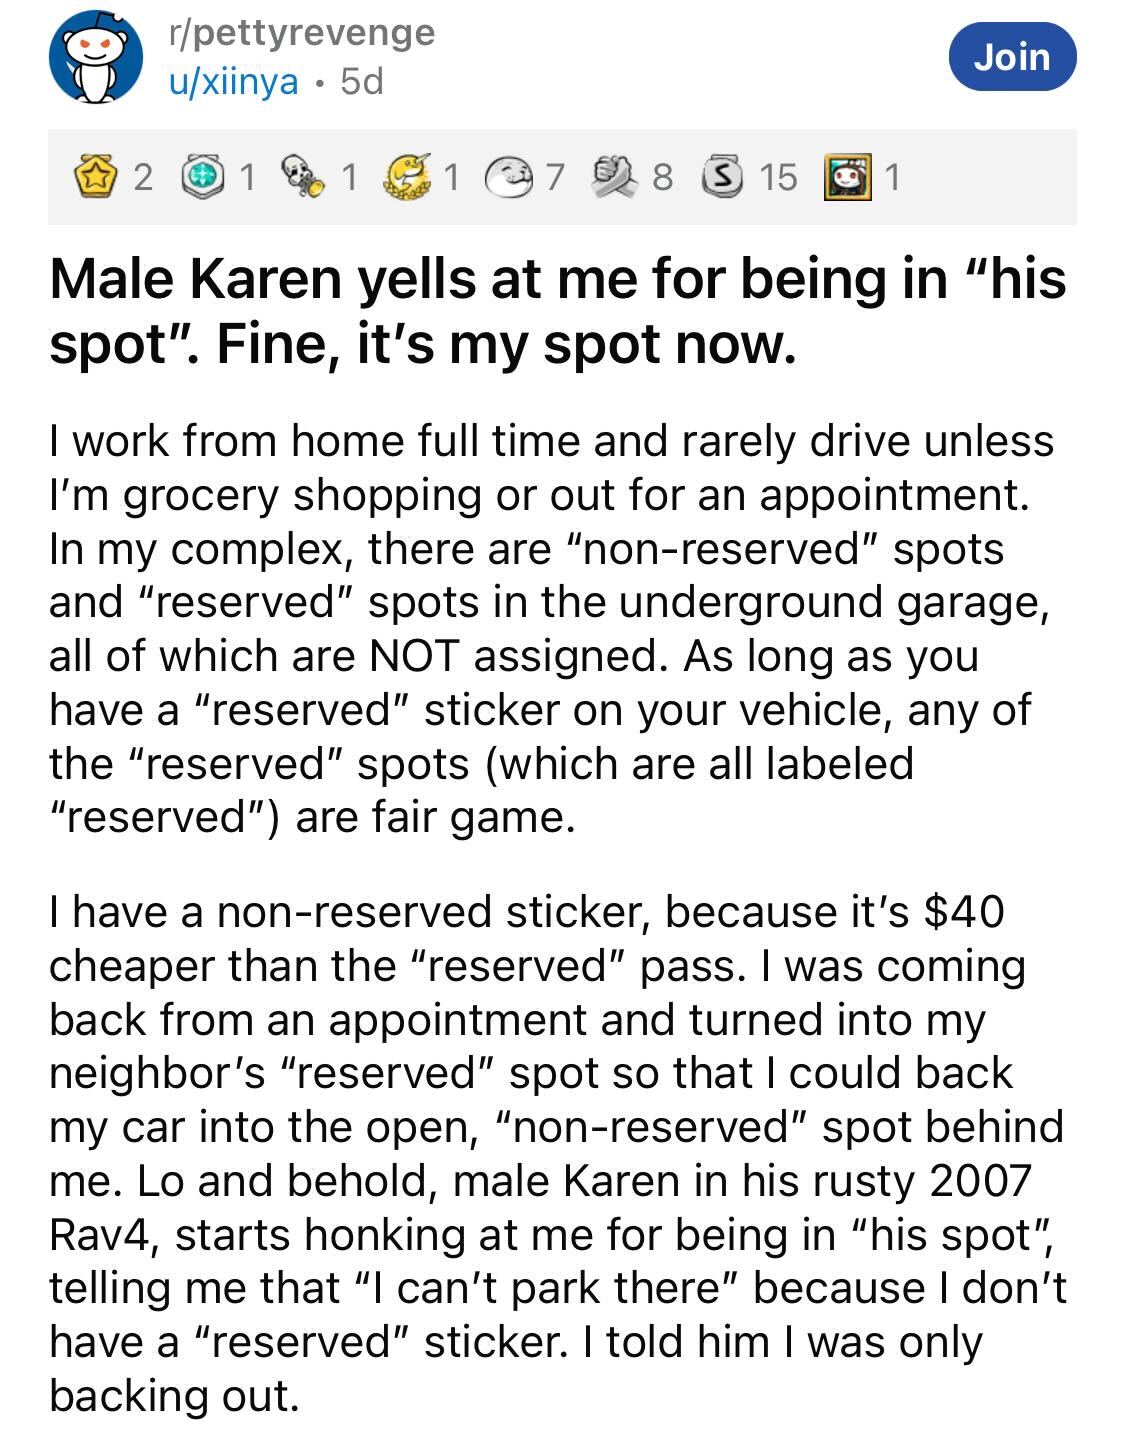 Male Karen Loses Parking Spot --   Male Karen yells at me for being in "his spot". Fine, it's my spot now. 1 1 Join 1 I work from home full time and rarely drive unless I'm grocery shopping or out for an appointment. In my complex, there are…